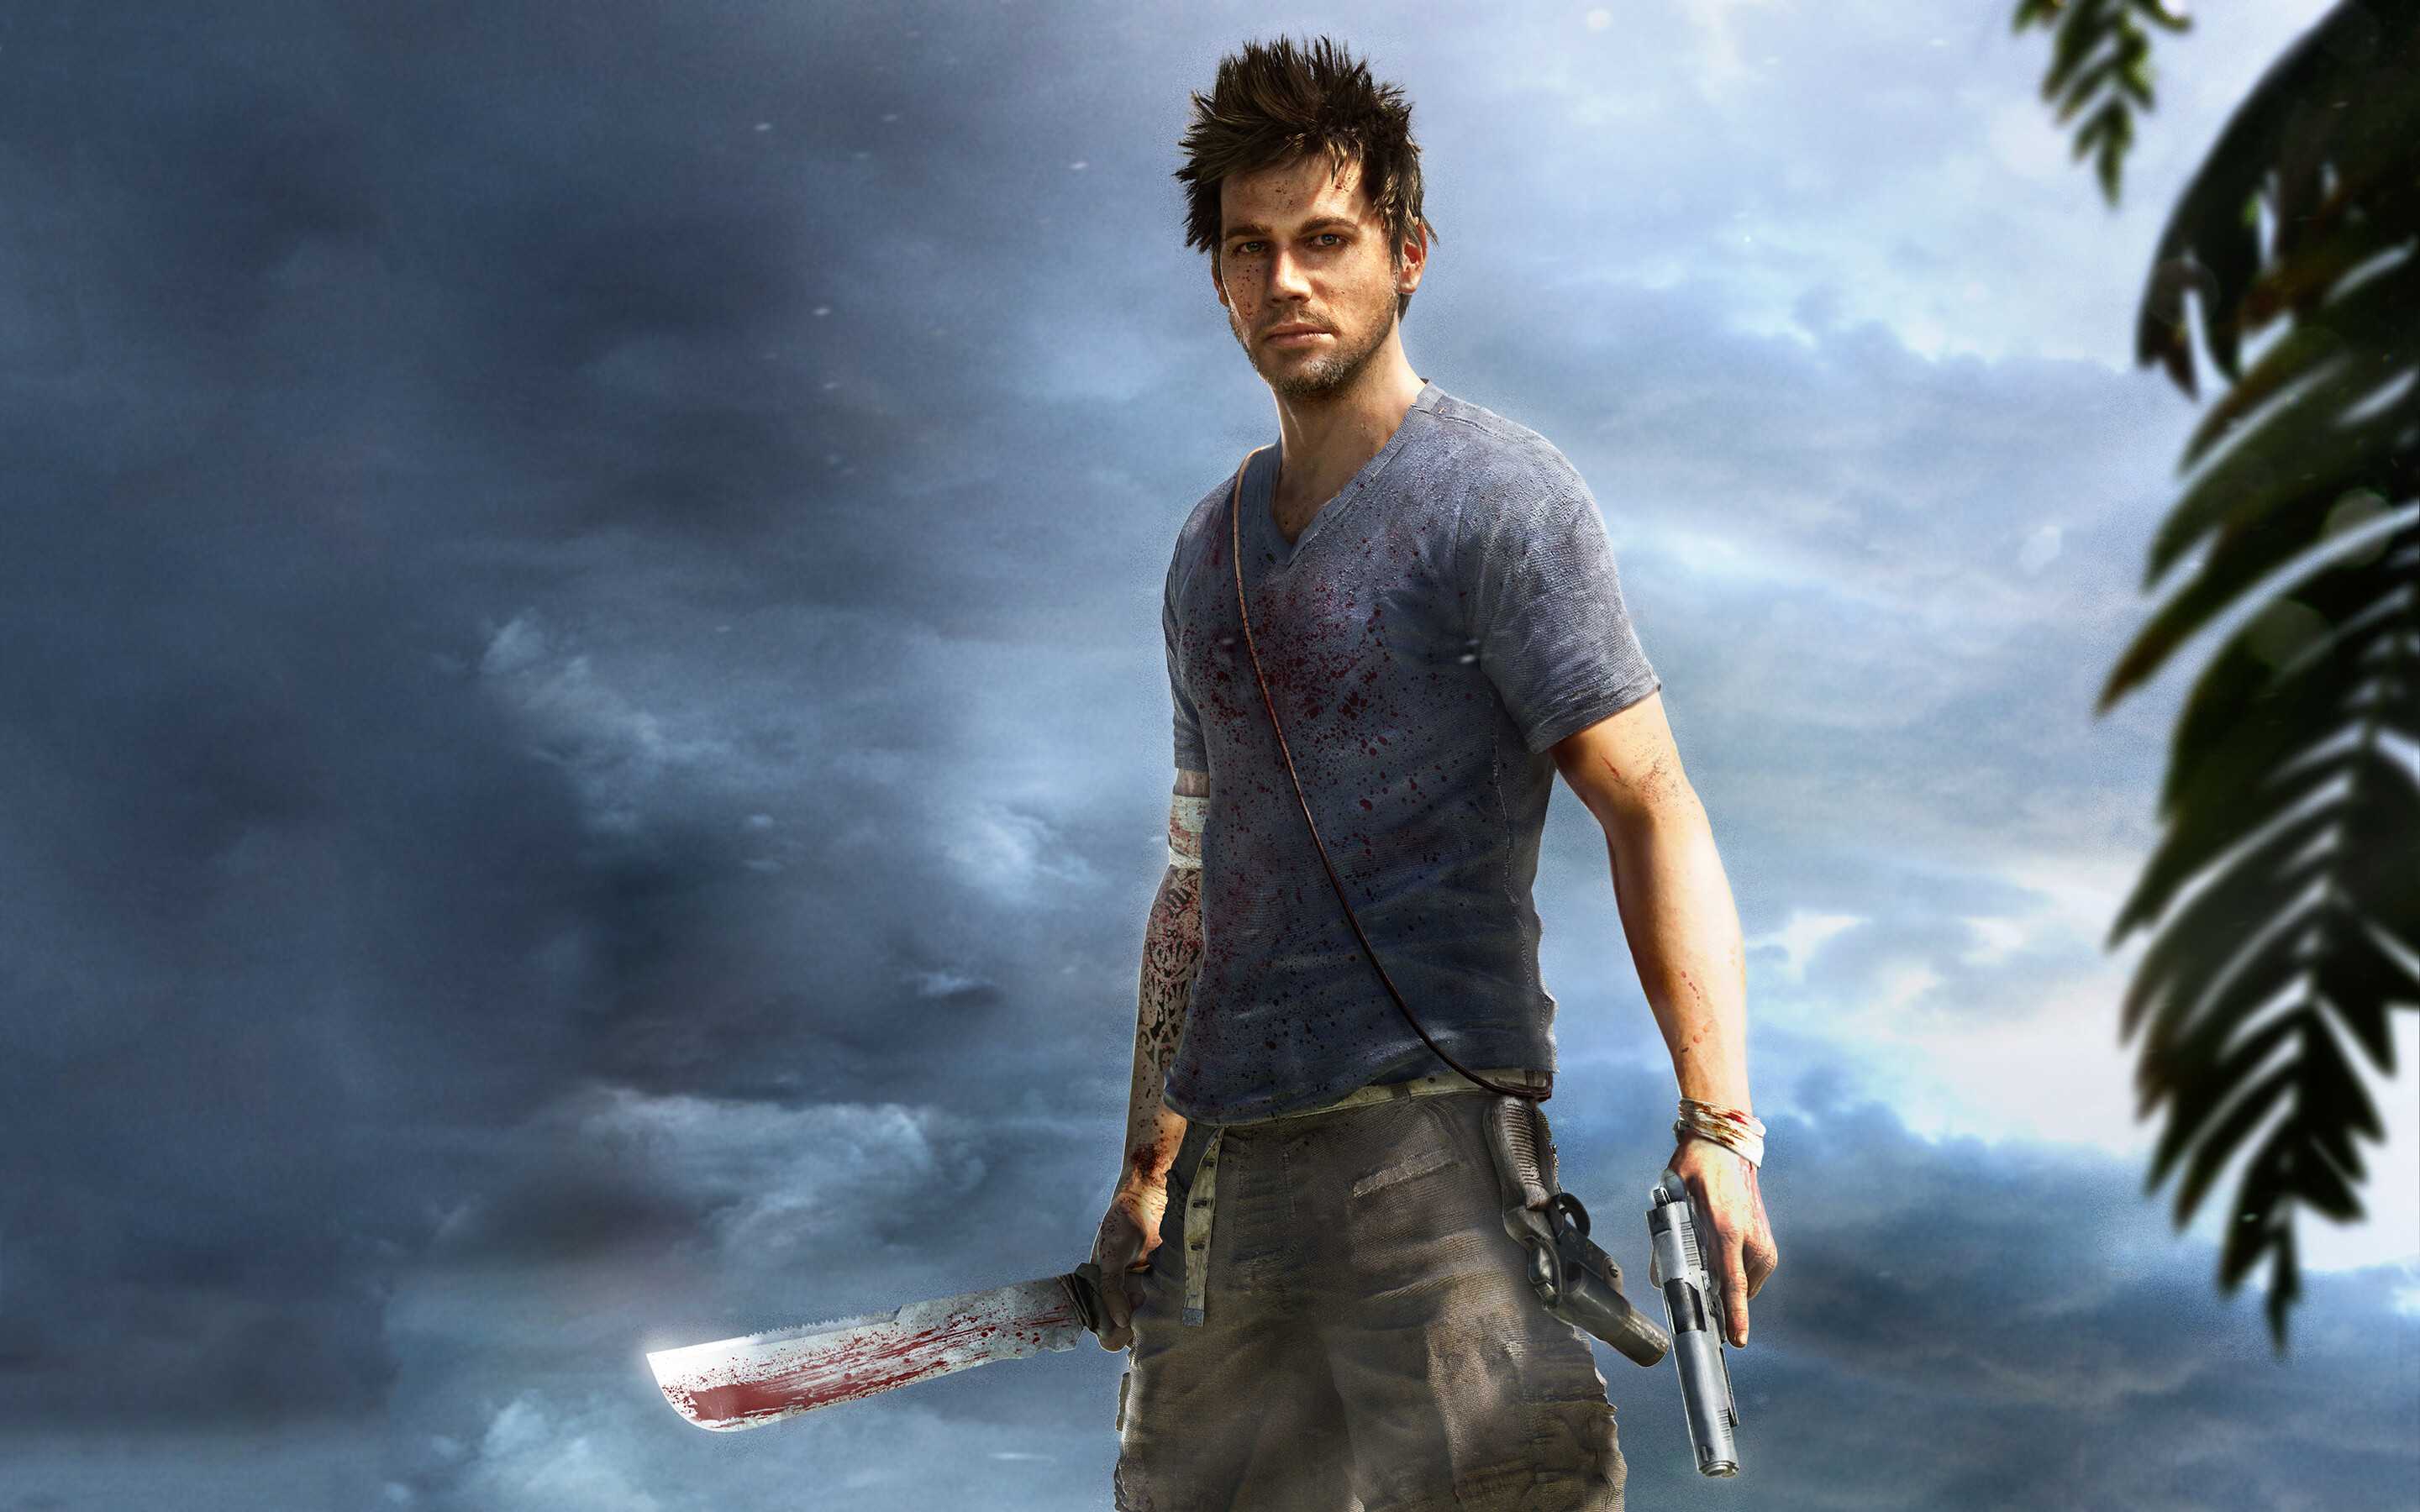 Far Cry 3: Jason Brody, The protagonist, A franchise of first-person shooter games. 2880x1800 HD Background.